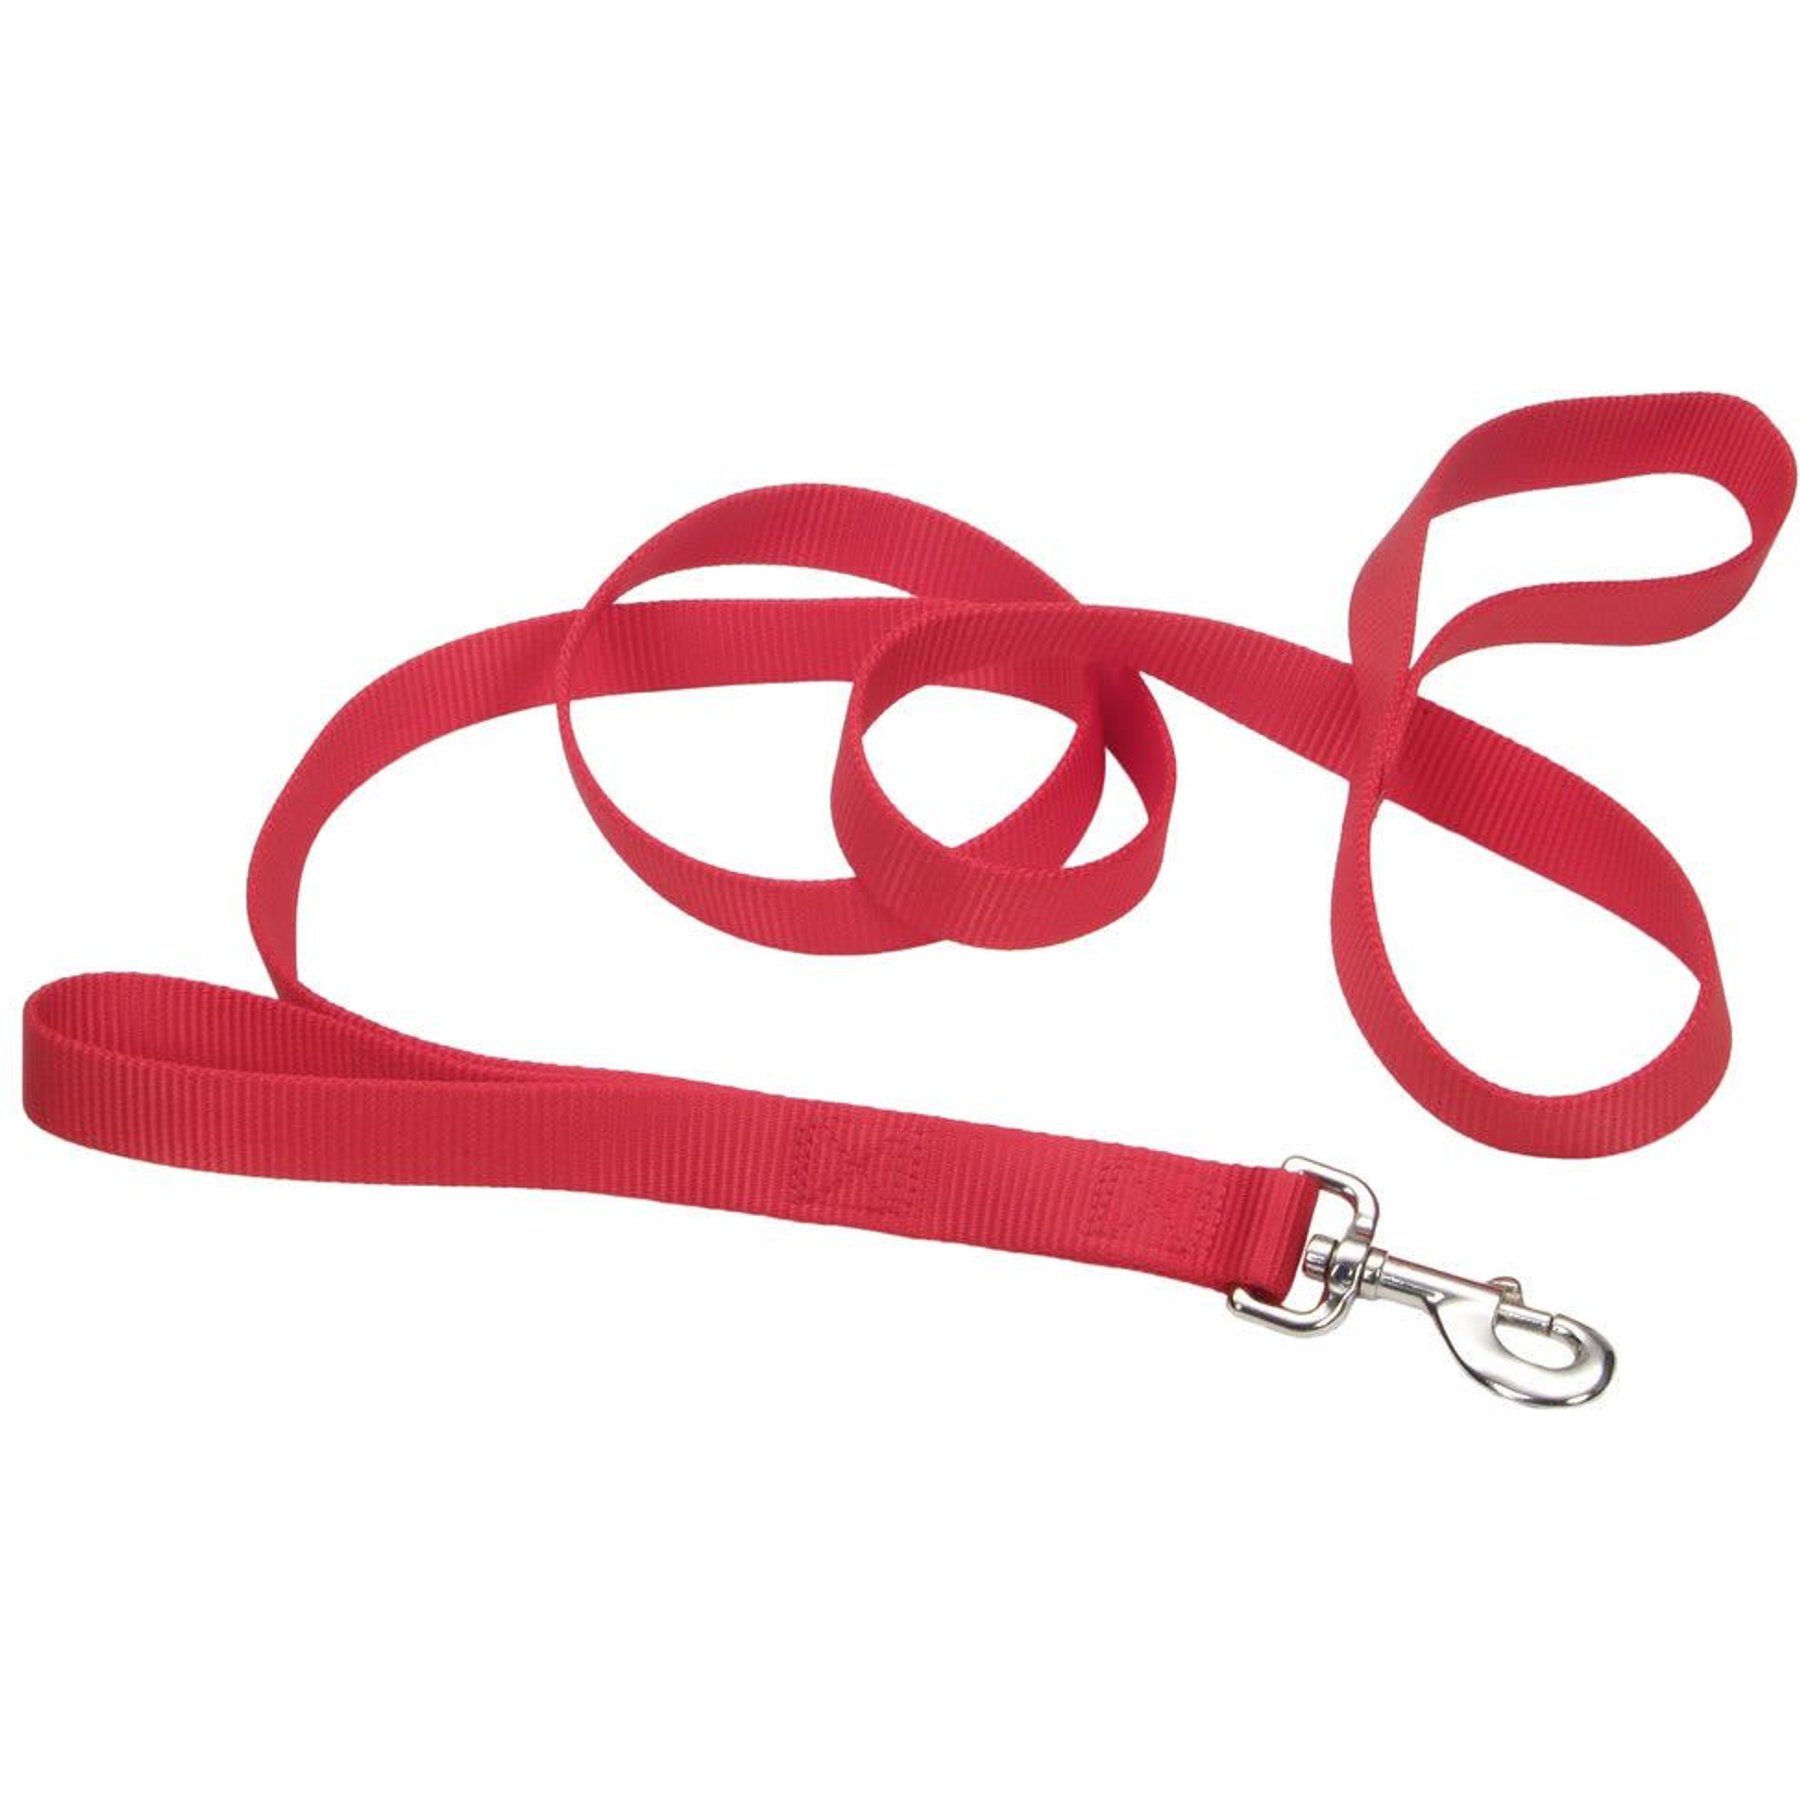 LOOPS 2 Double Handle Dog Leash, Red - Chewy.com